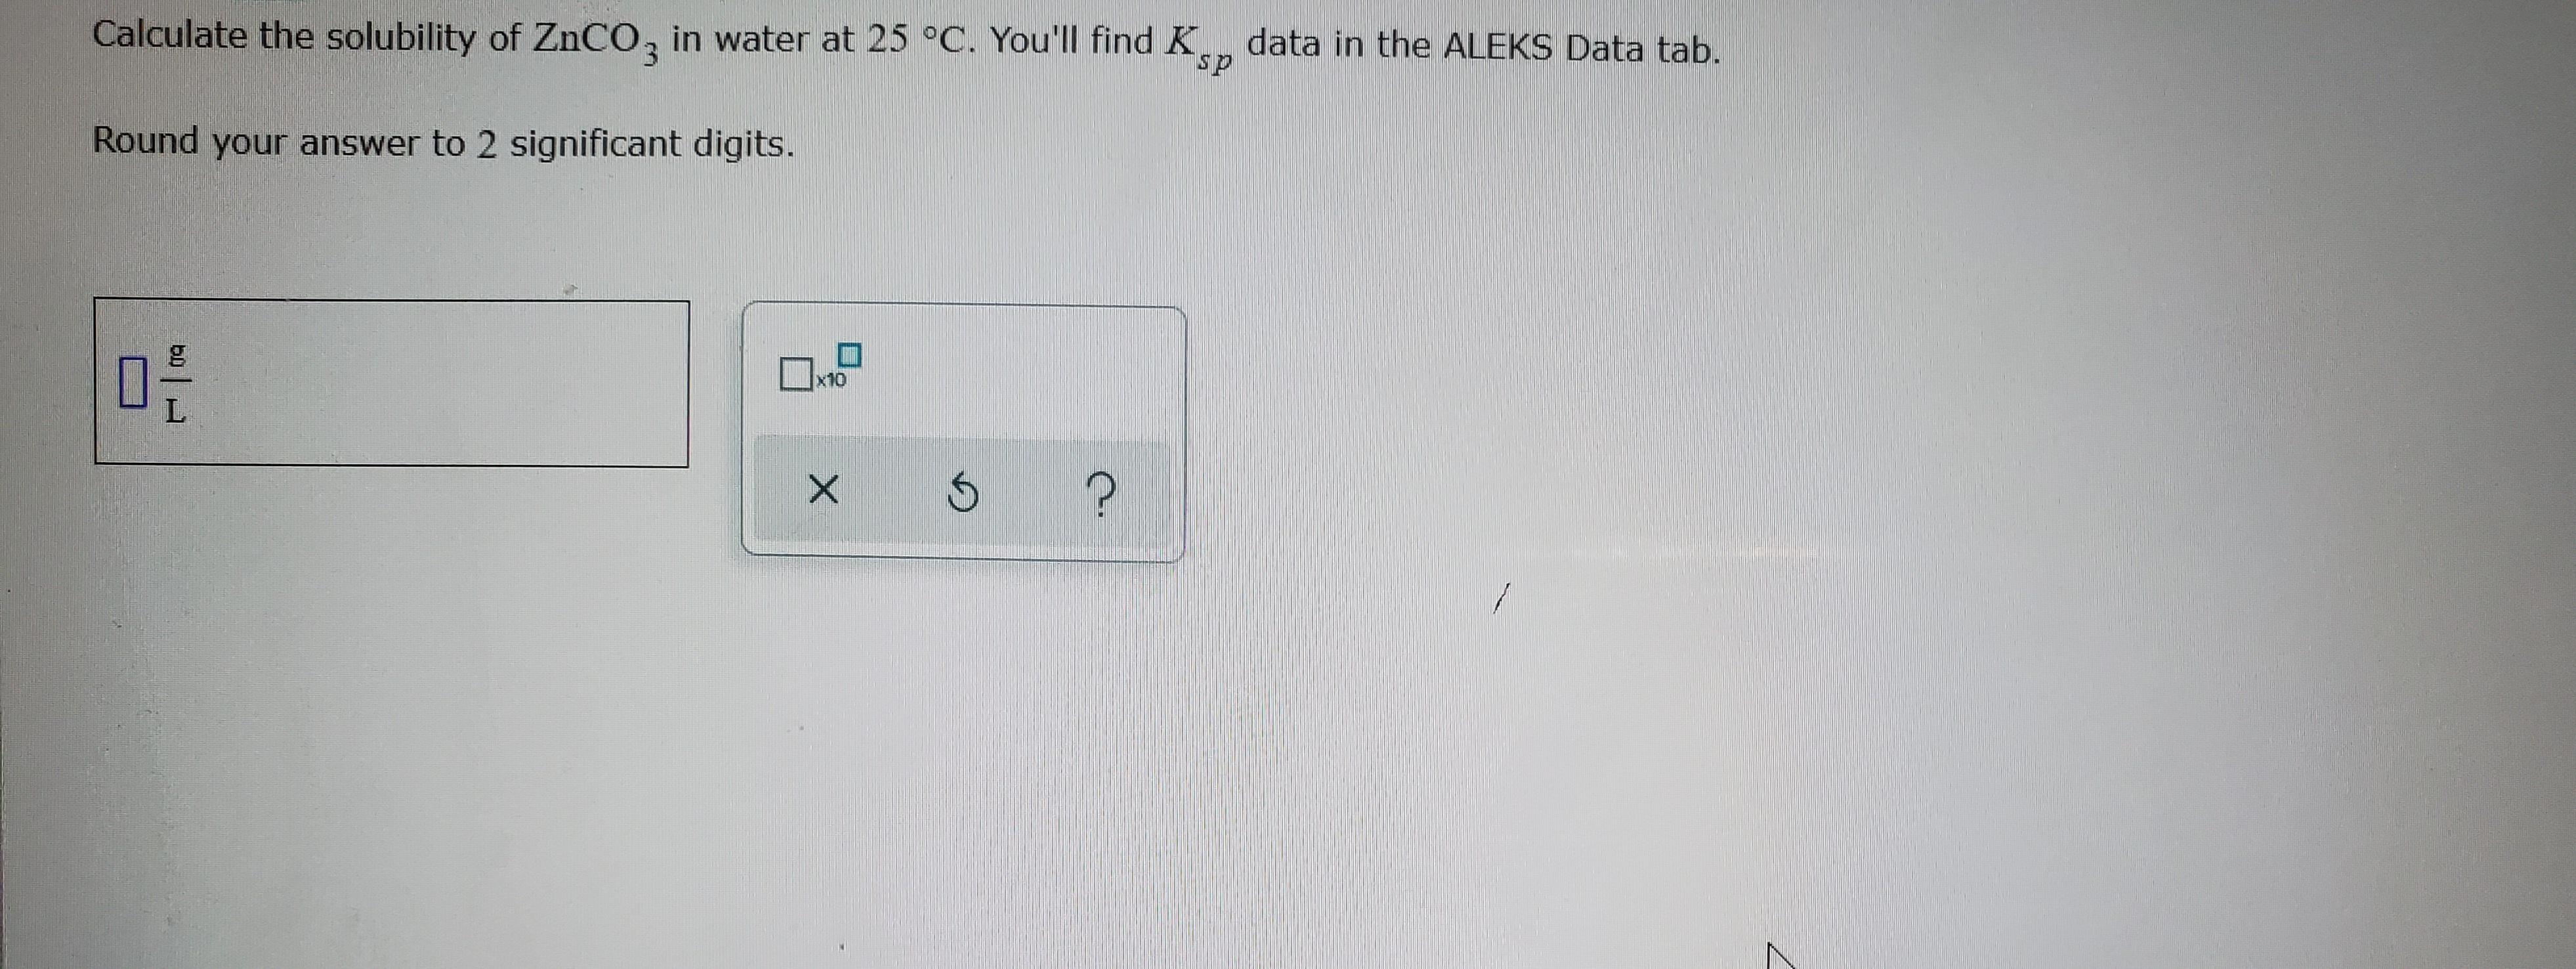 Calculate the solubility of ZNCO, in water at 25 °C. You'll find K, data in the ALEKS Data tab.
3.
ds.
Round your answer to 2 significant digits.
x10
